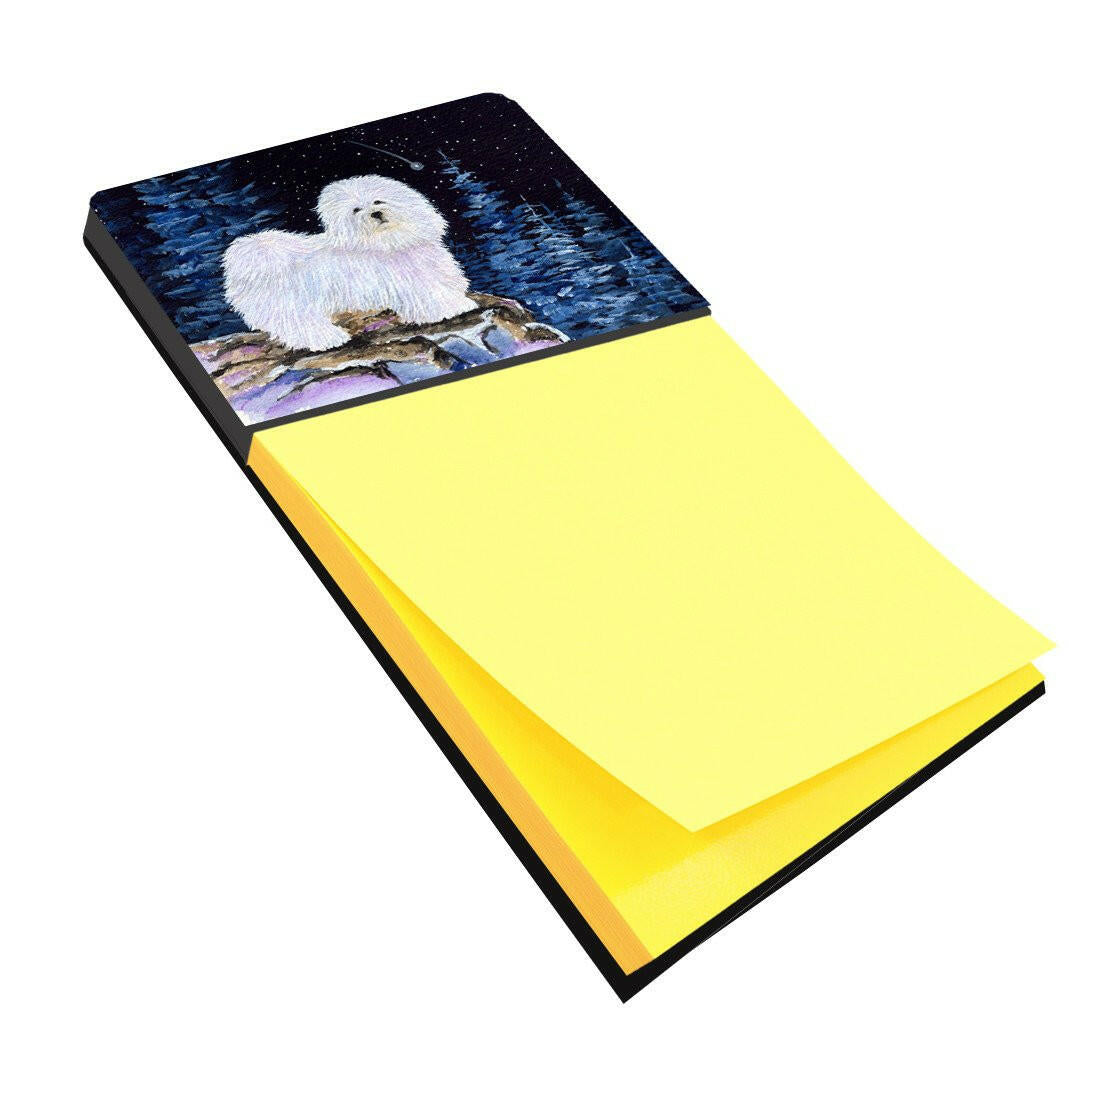 Starry Night Coton de Tulear Refiillable Sticky Note Holder or Postit Note Dispenser SS8437SN by Caroline's Treasures